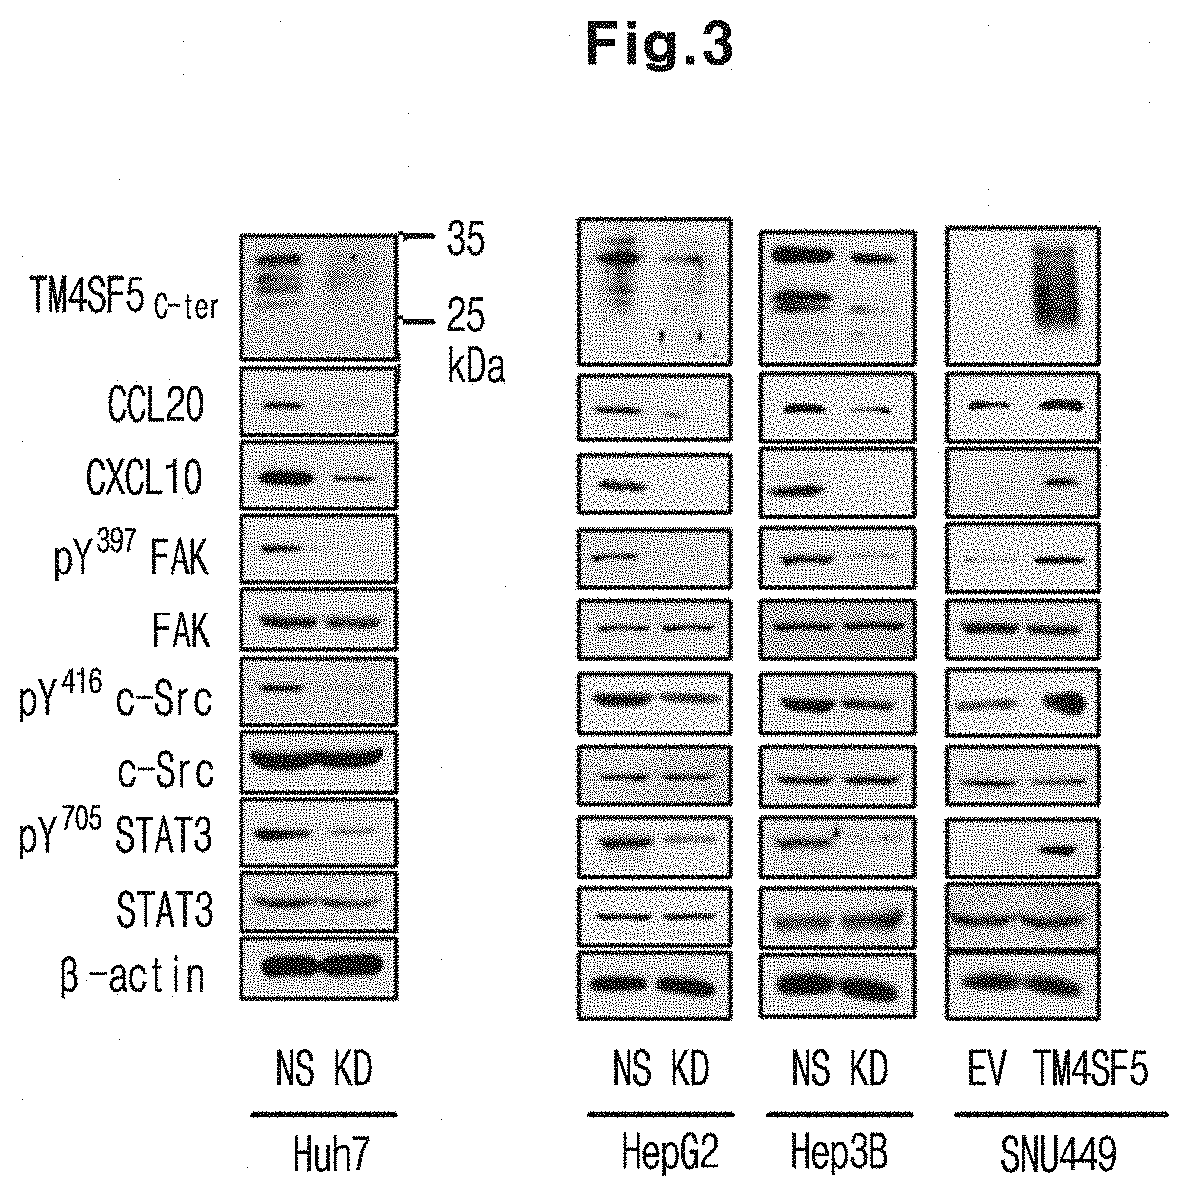 Immunosuppressant Comprising TSAHC or a Pharmaceutically Acceptable Salts Thereof as an Active Ingredient